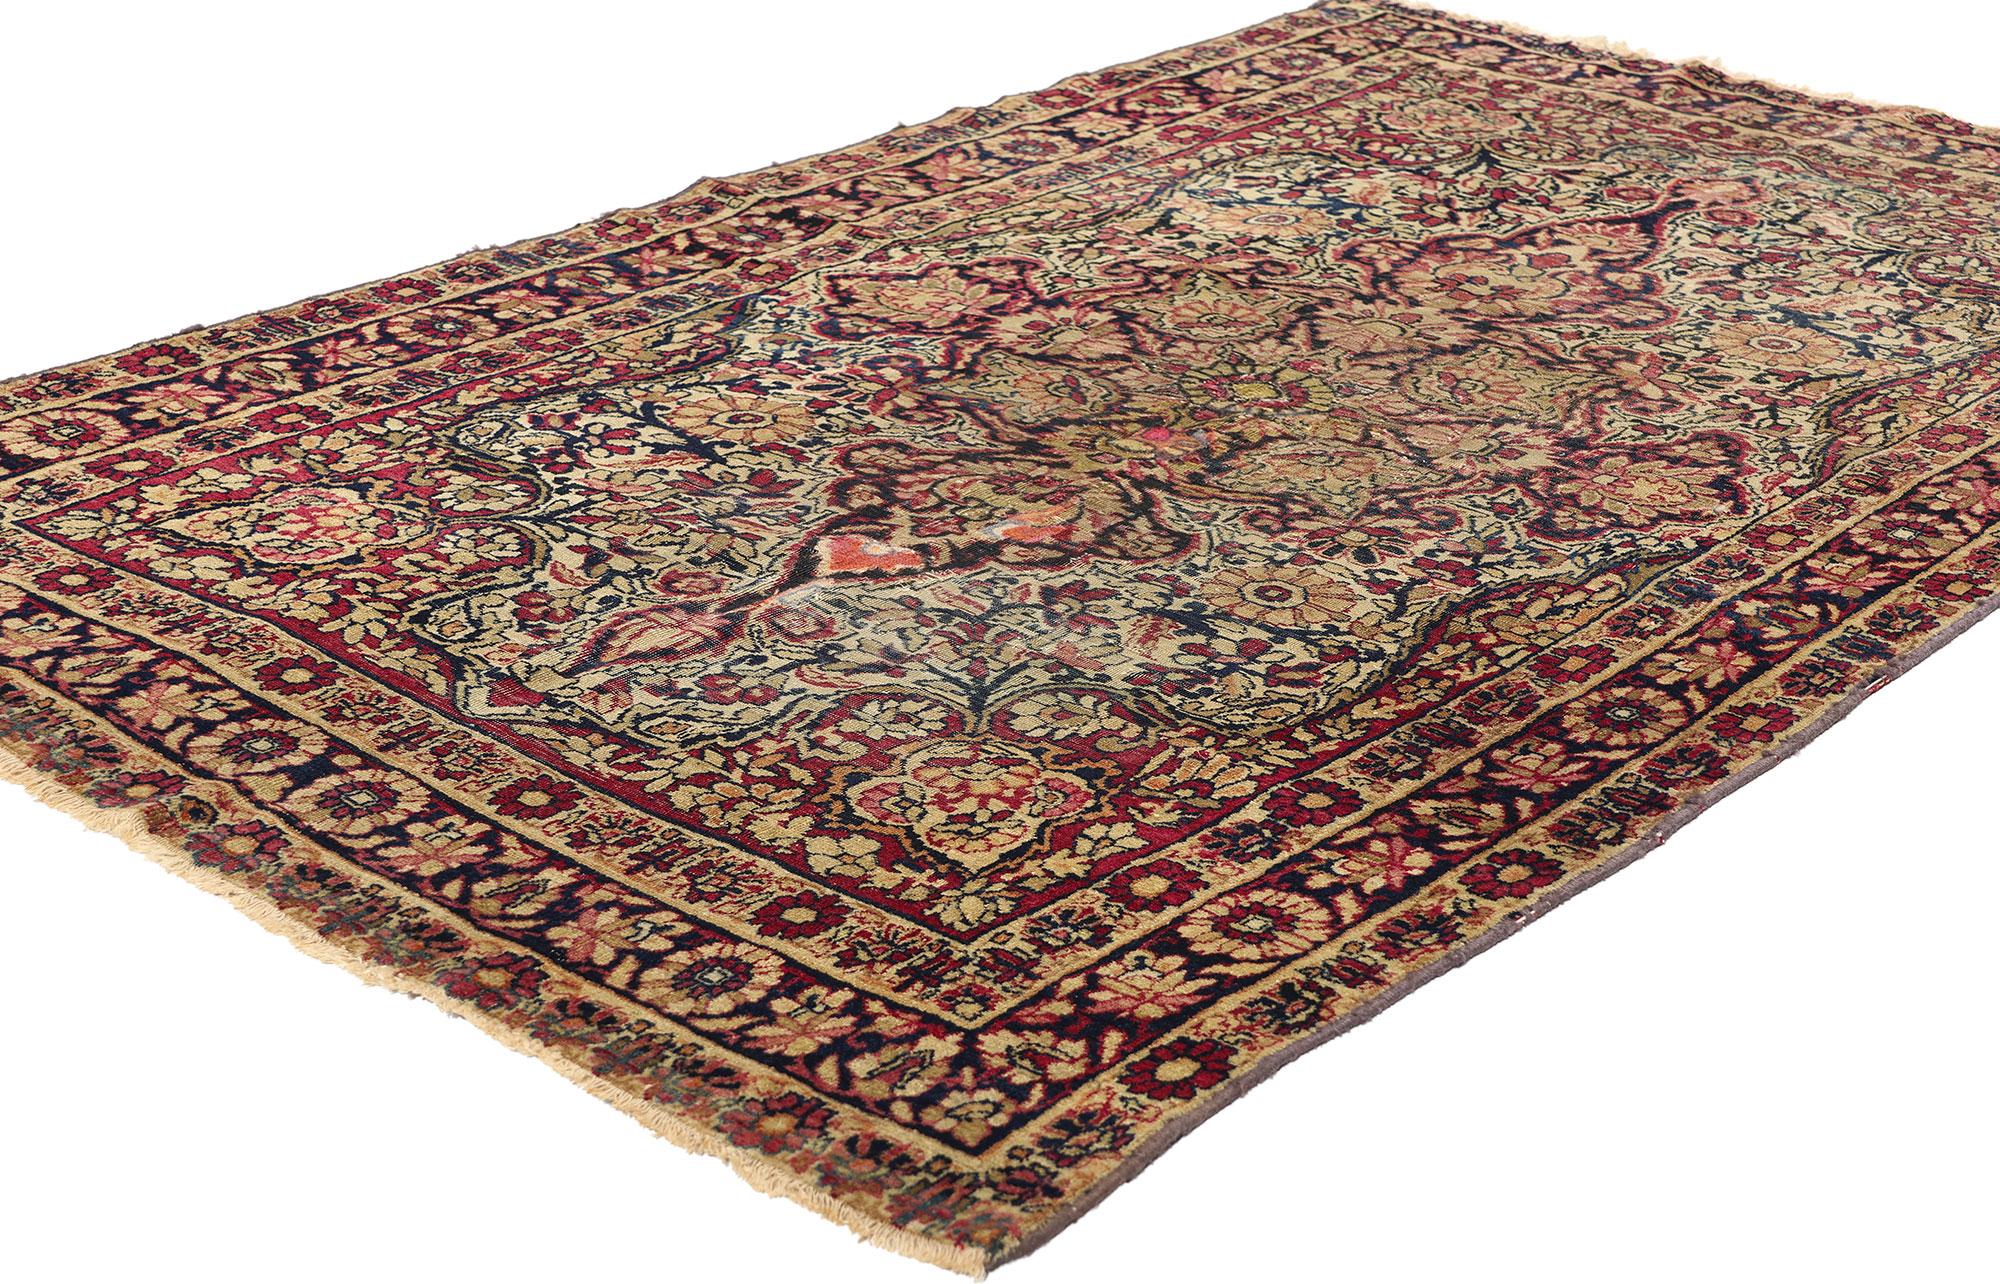 78761 Distressed Antique Persian Kerman Rug, 03'10 x 06'02. The legacy of Kerman rugs originates from the heart of south-central Iran, within the historic city of Kerman. This bustling center of weaving embodies centuries-old artistry, crafting